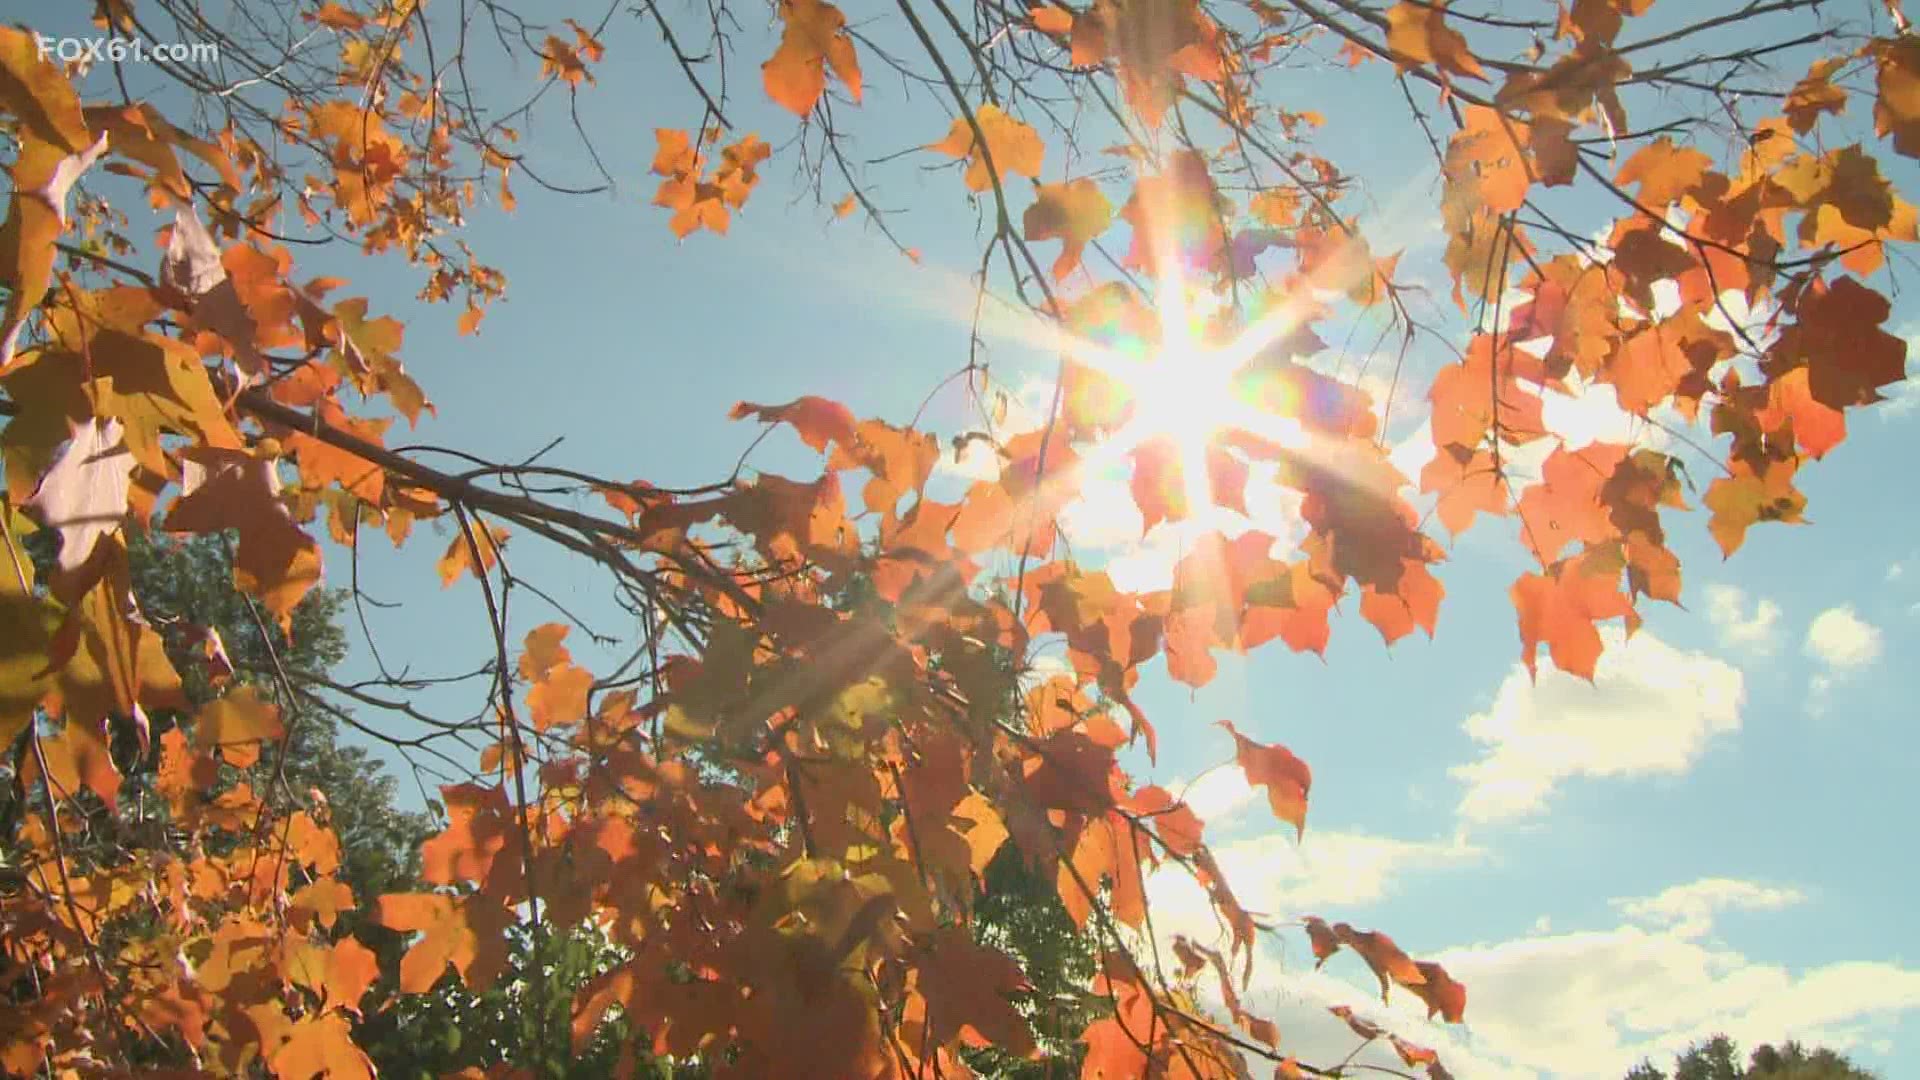 The Fall foliage season appears to be coming especially early in 2020